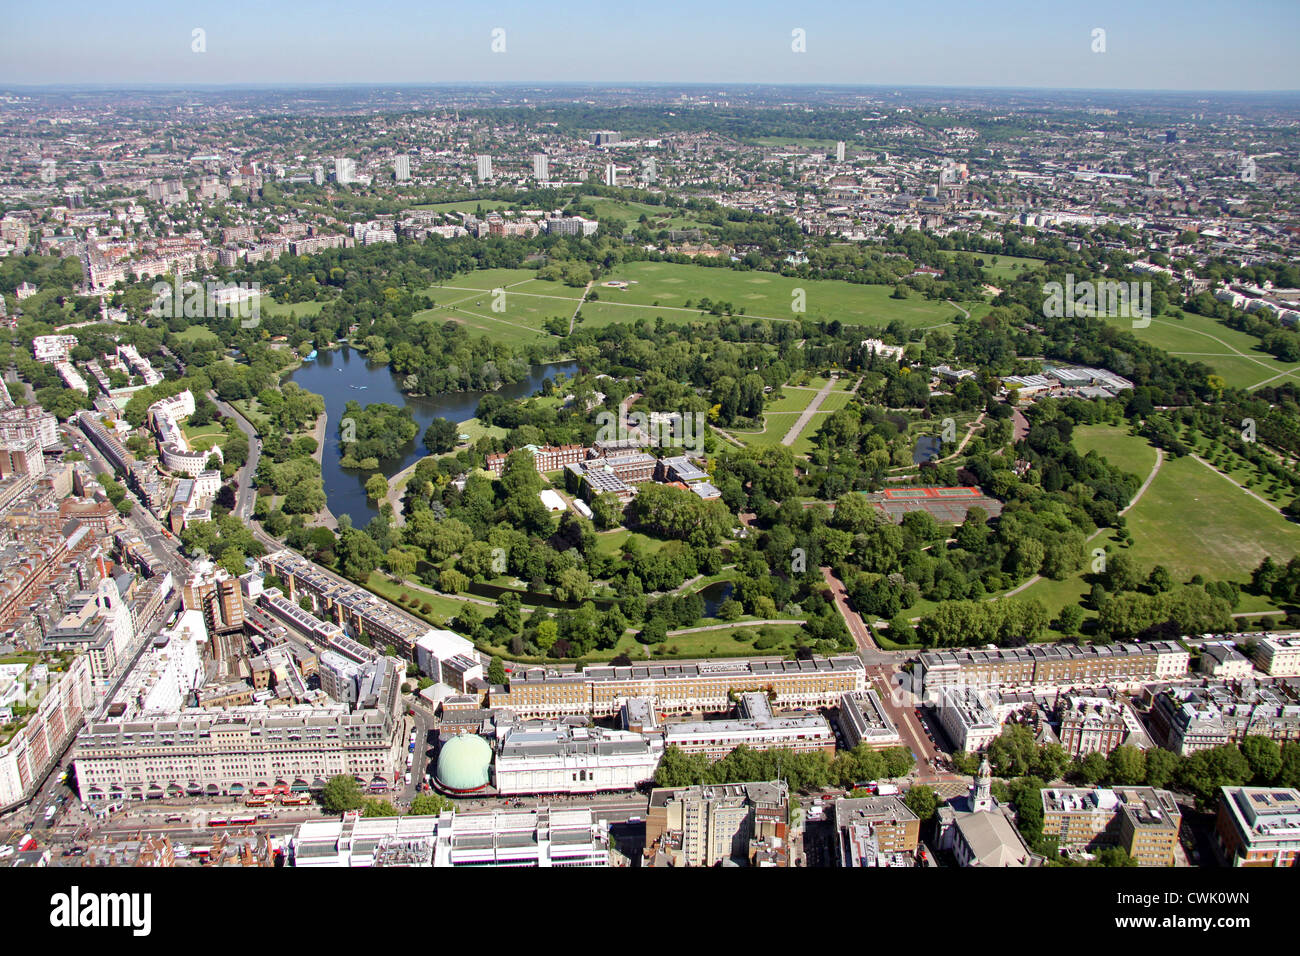 aerial view of Regent's Park London with Marylebone Road in the foreground Stock Photo